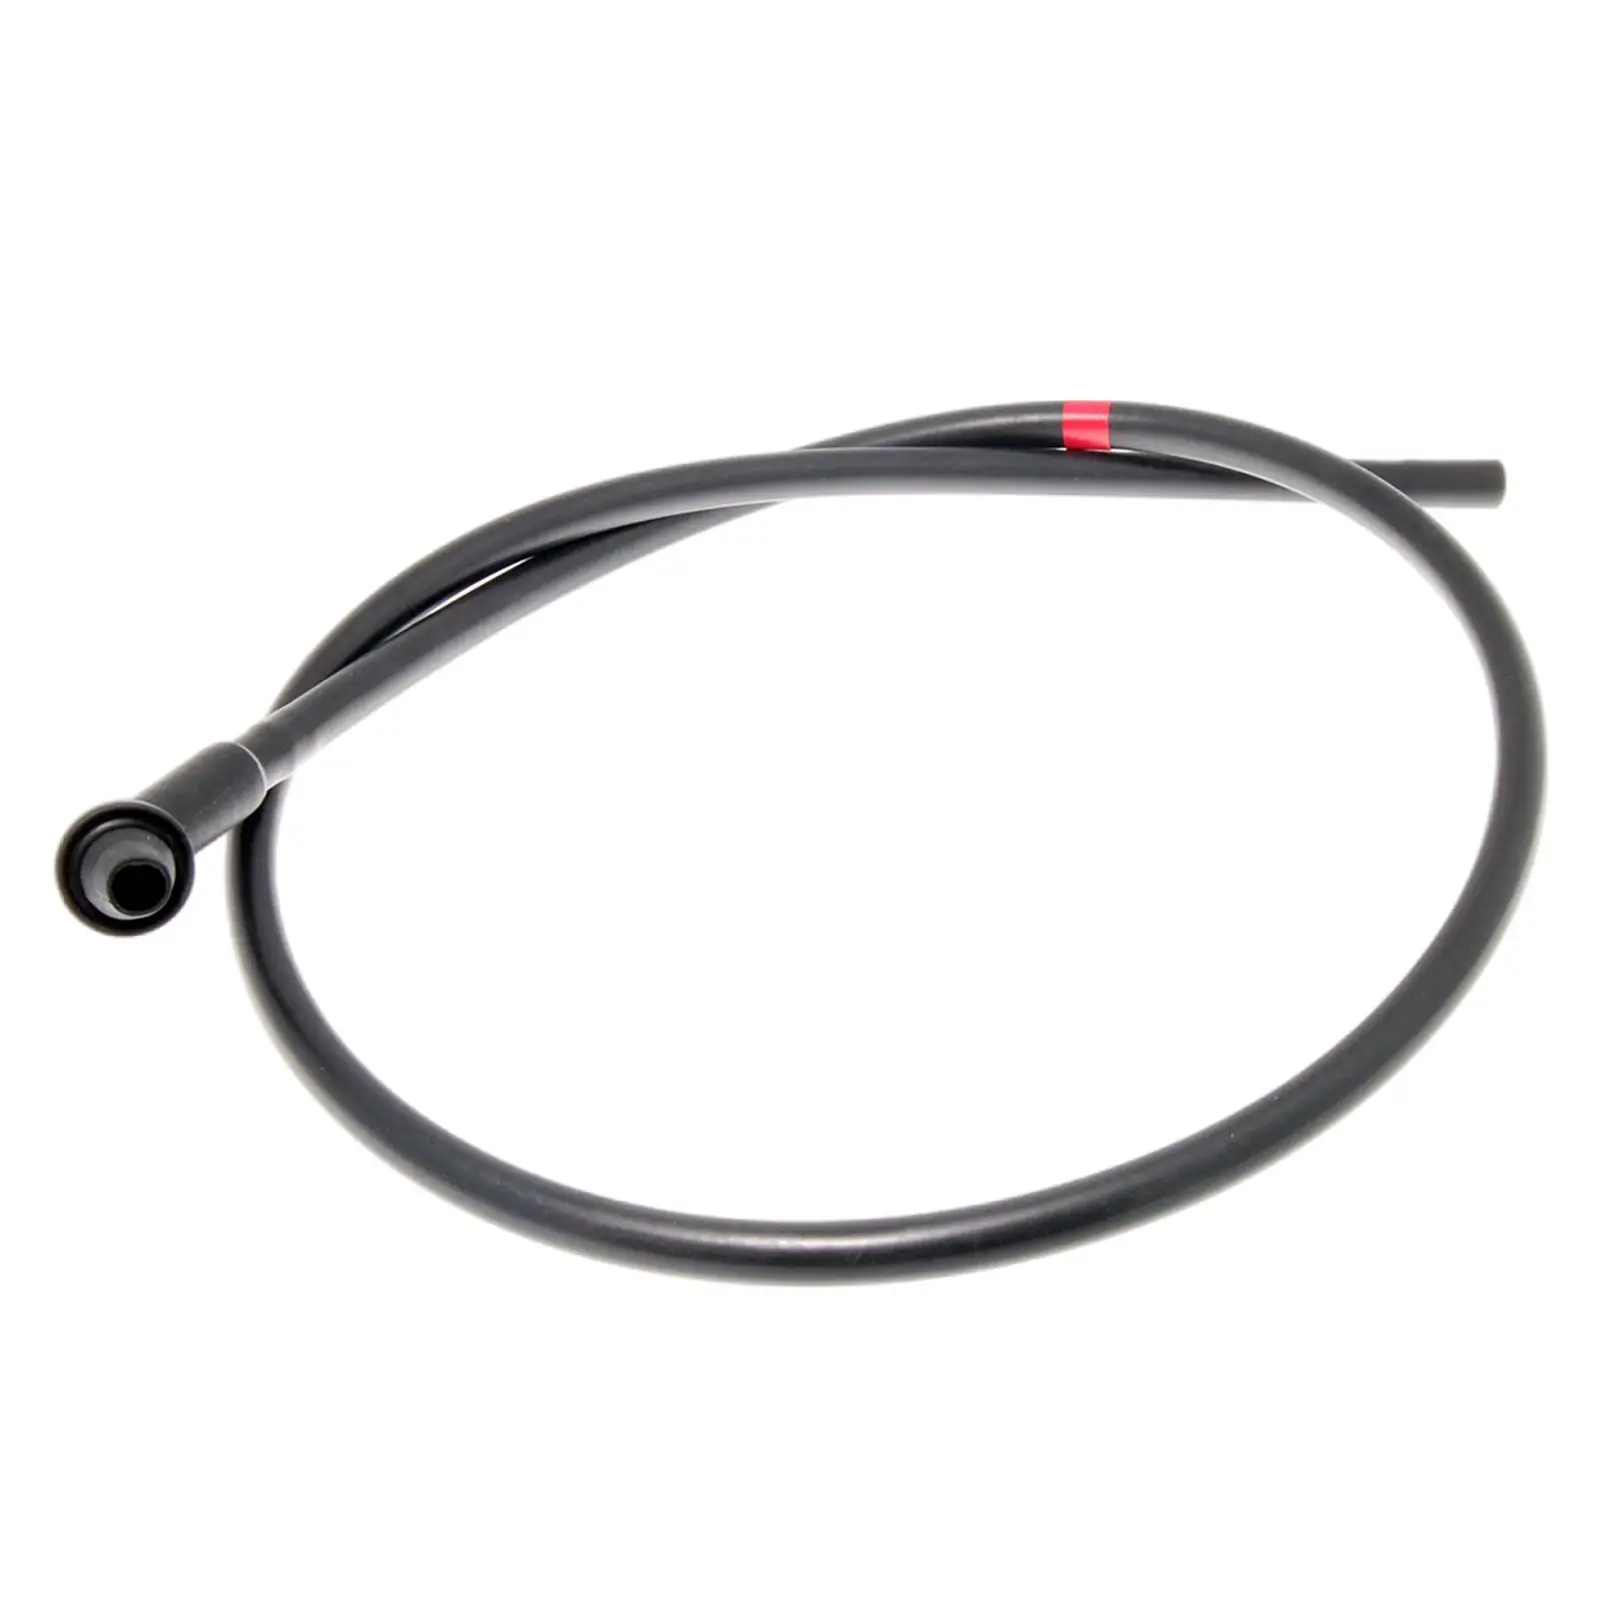 Sunroof Front Drain Hose Water Tube, Eeh500100, Black, for Landrover Discovery